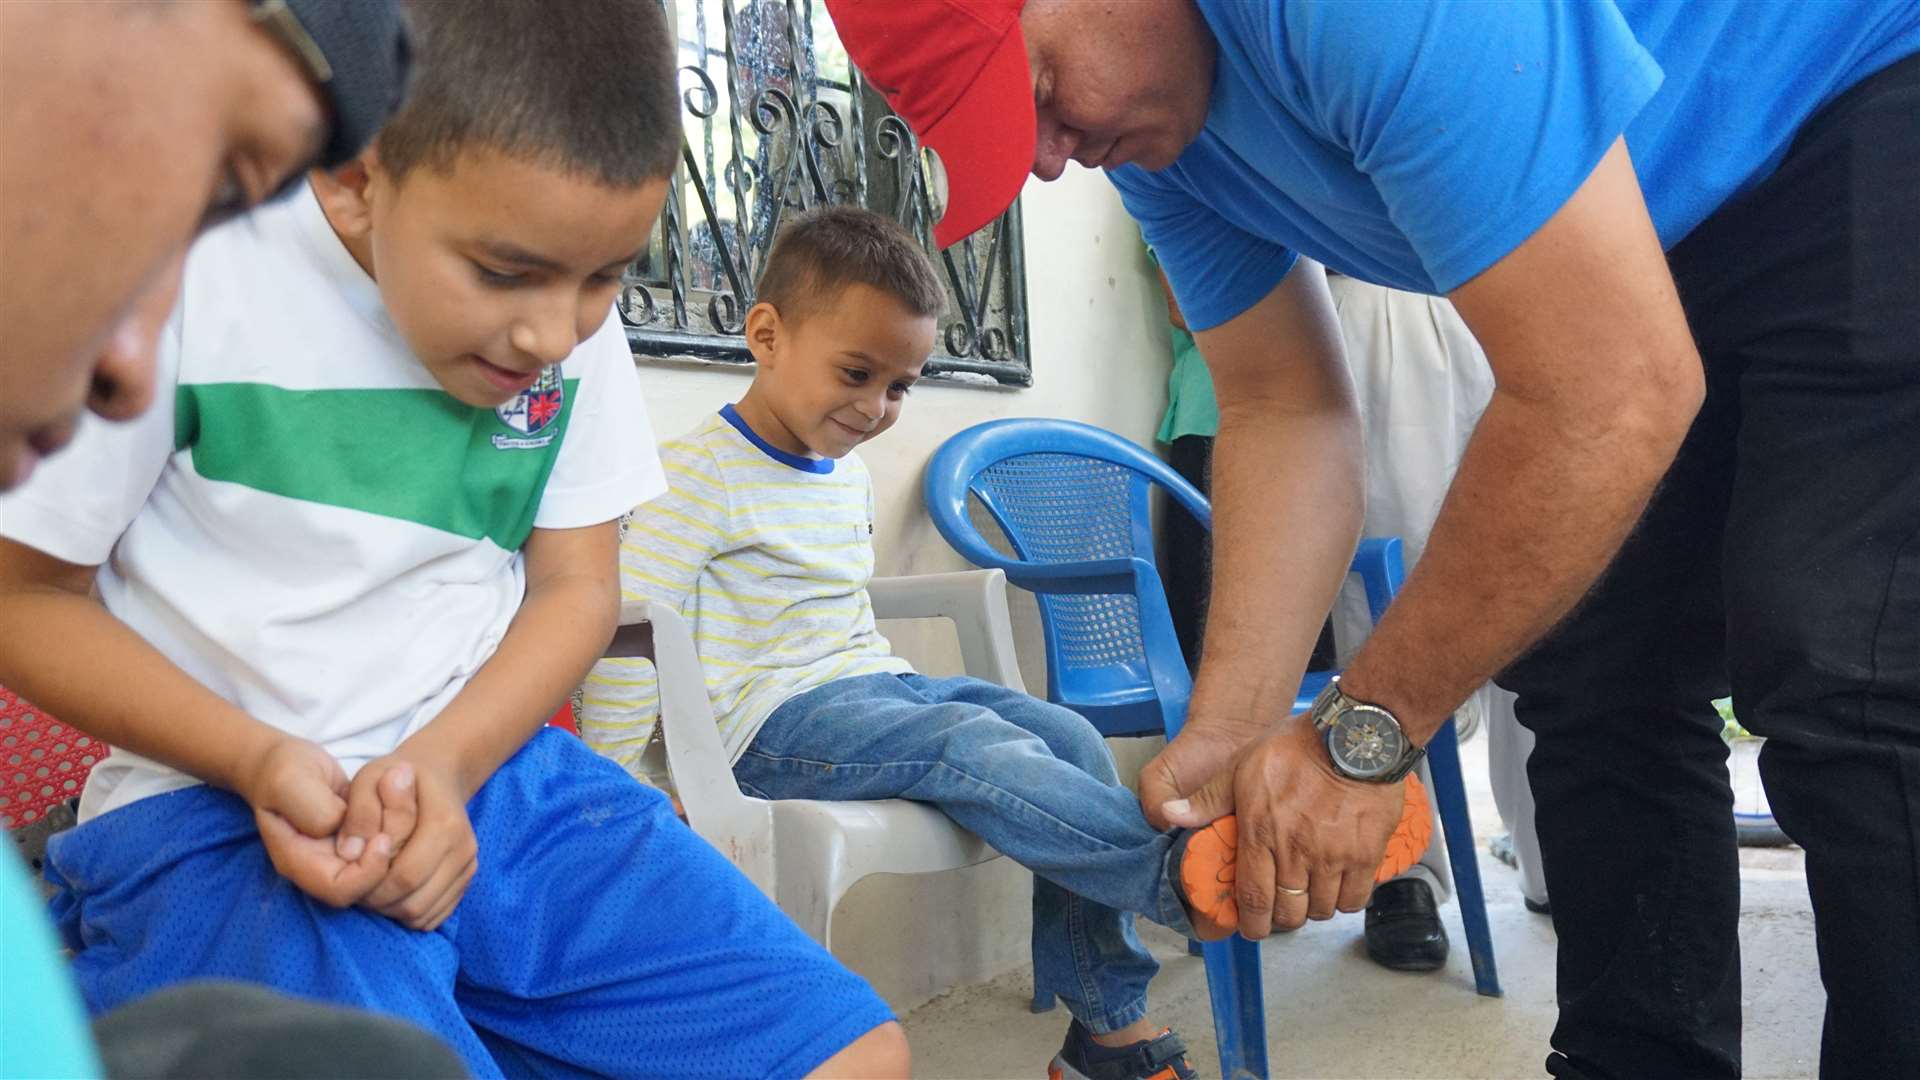 Children in Nicaragua being fitted with donated shoes